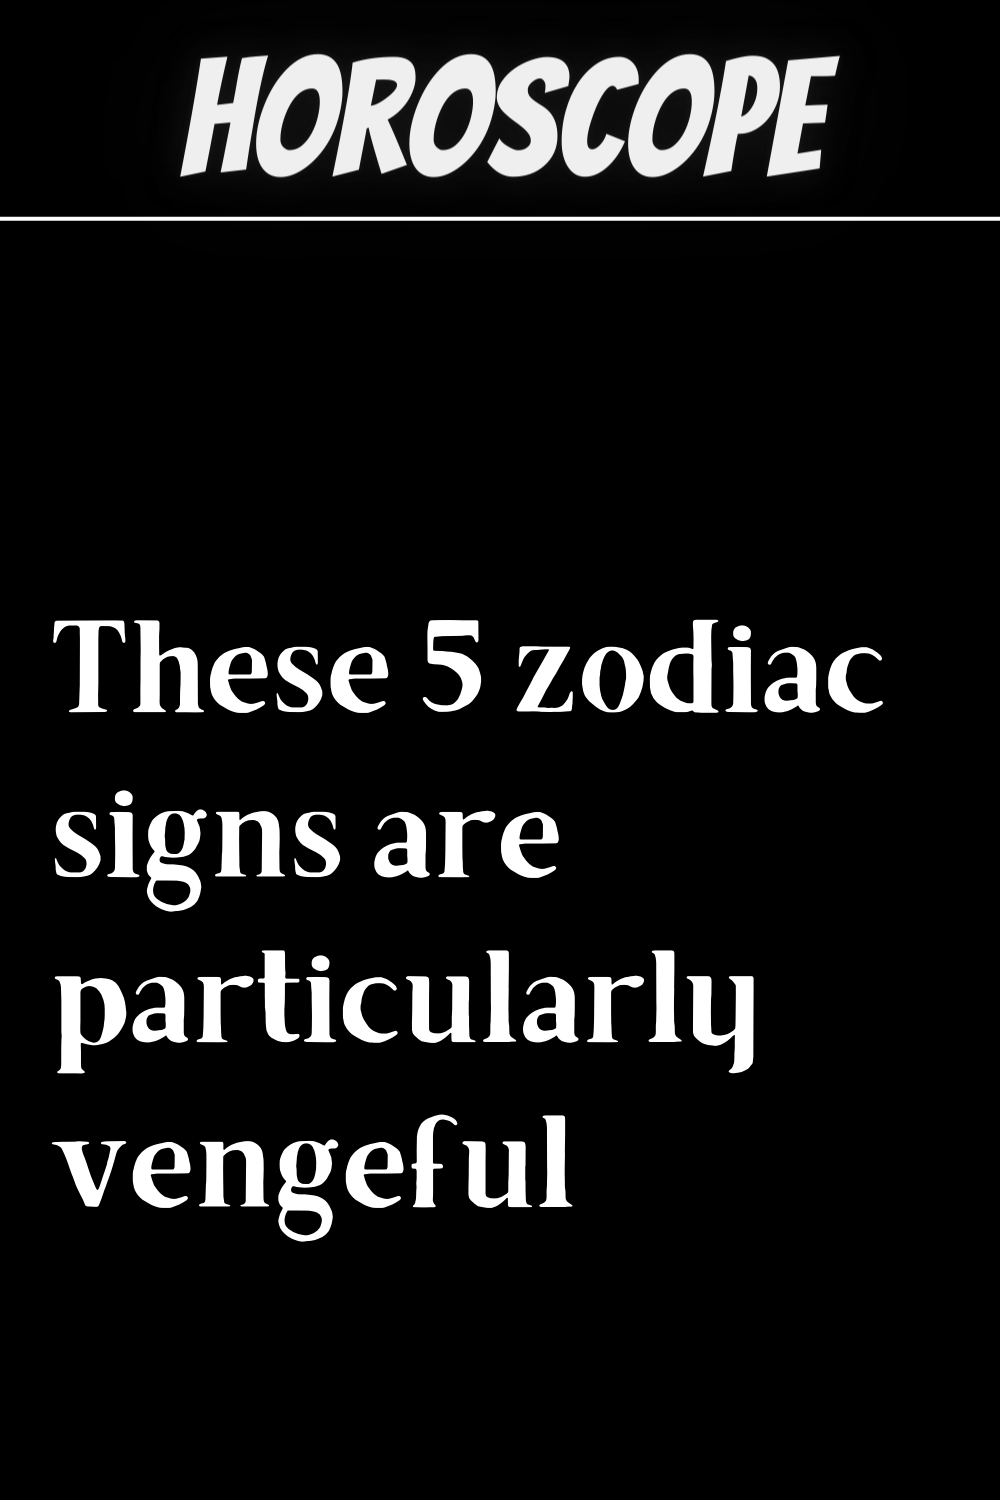 These 5 zodiac signs are particularly vengeful